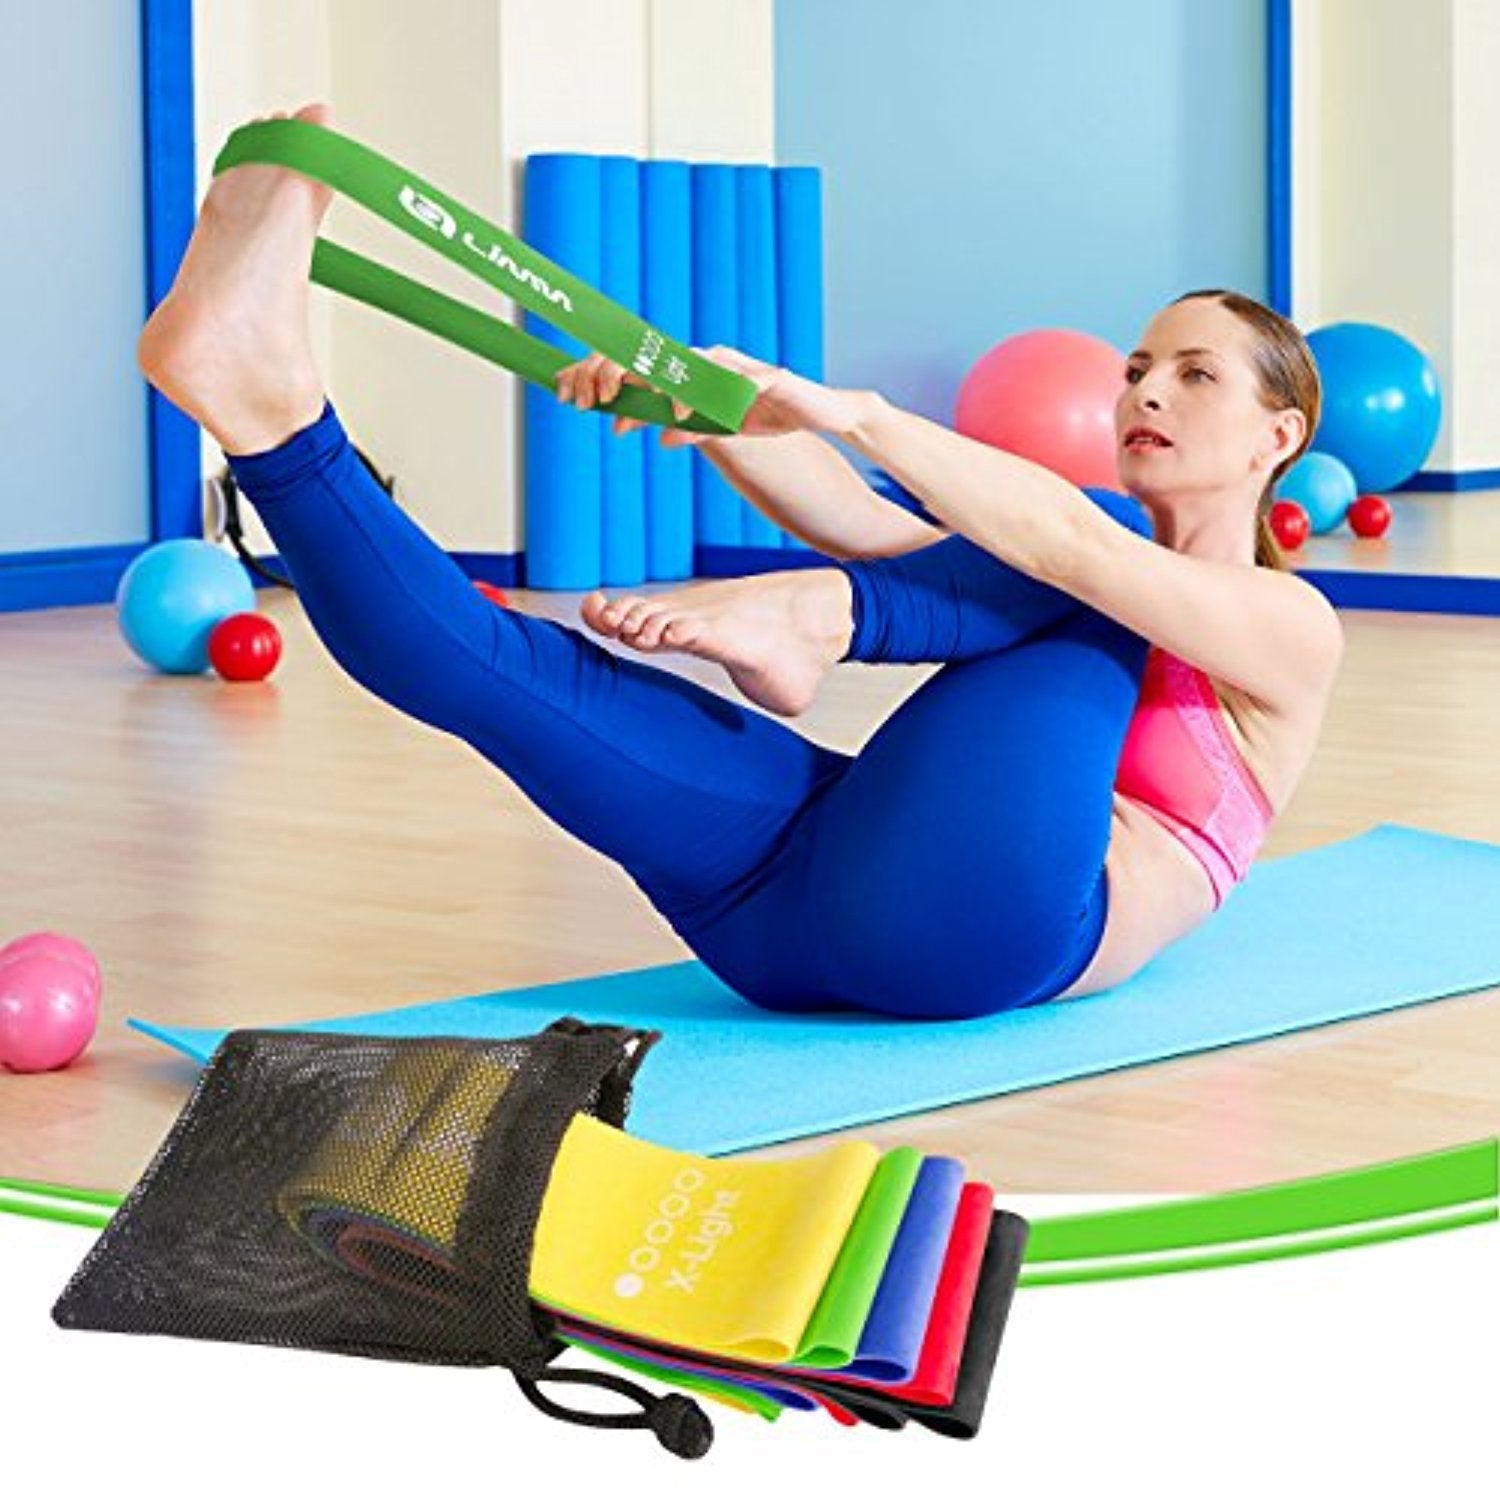 Resistance Loop Band Exercise Set, Guide, Bag, and Video